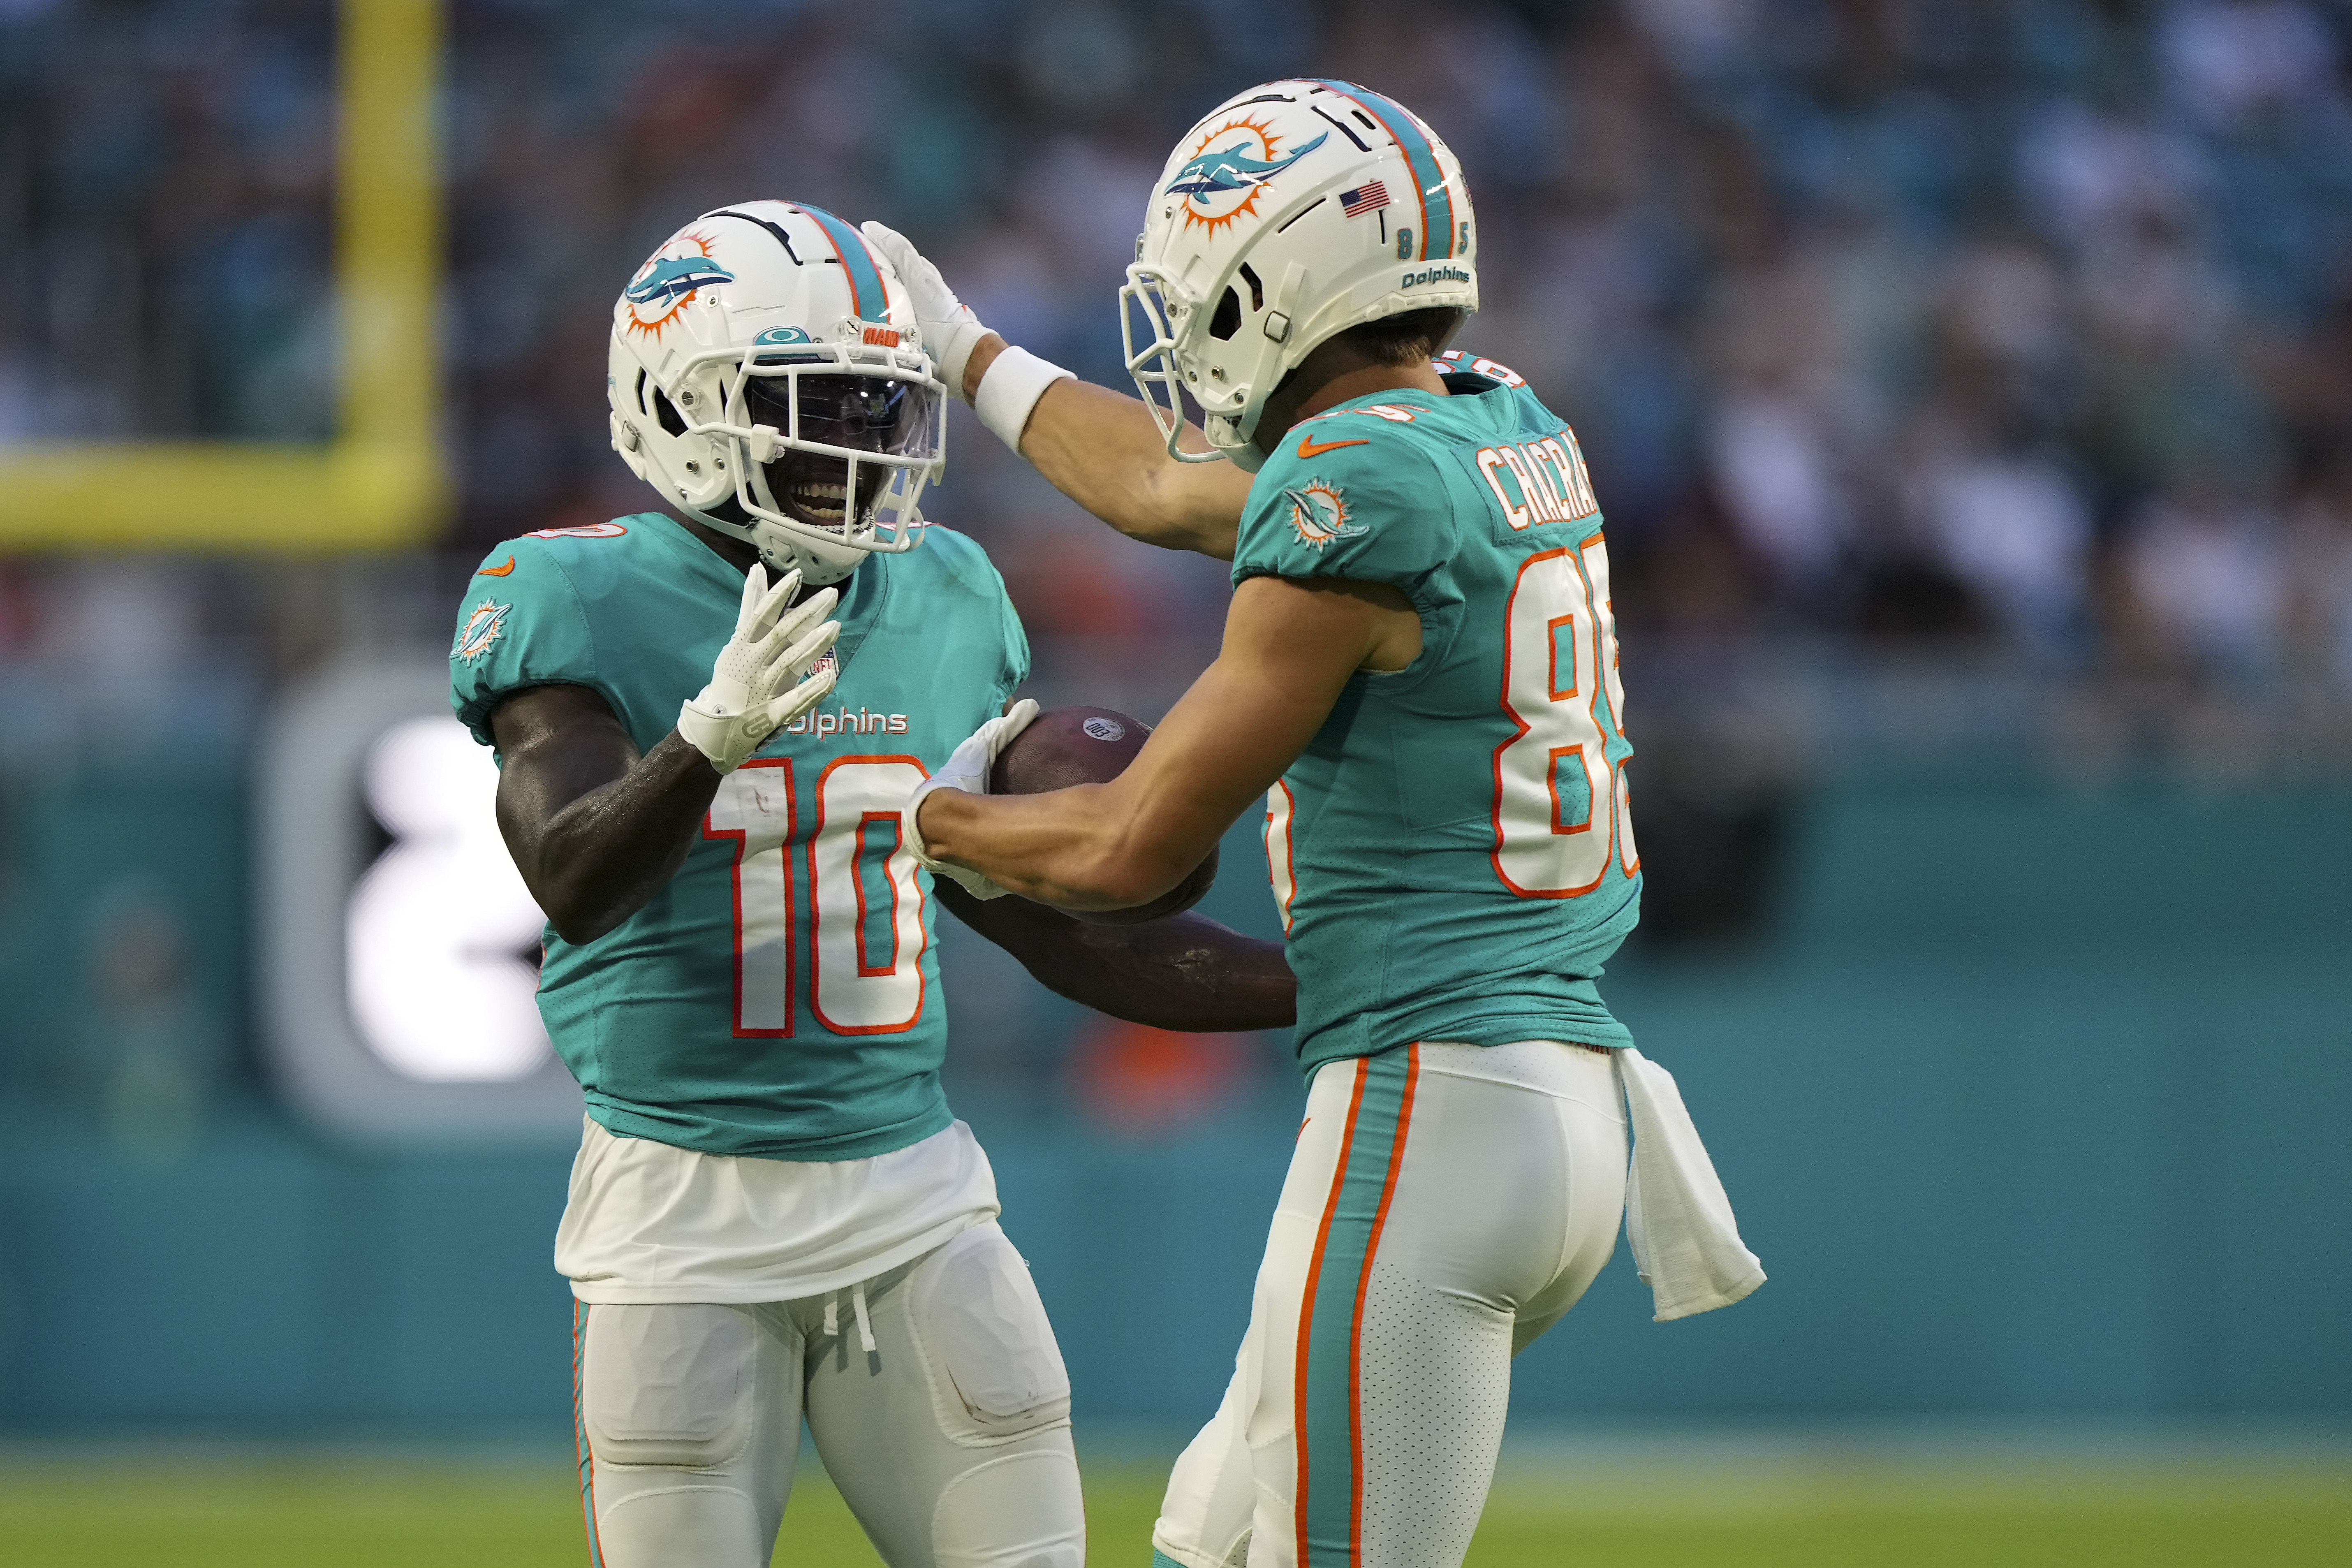 Tagovailoa, Hill connect early as Dolphins roll past Eagles